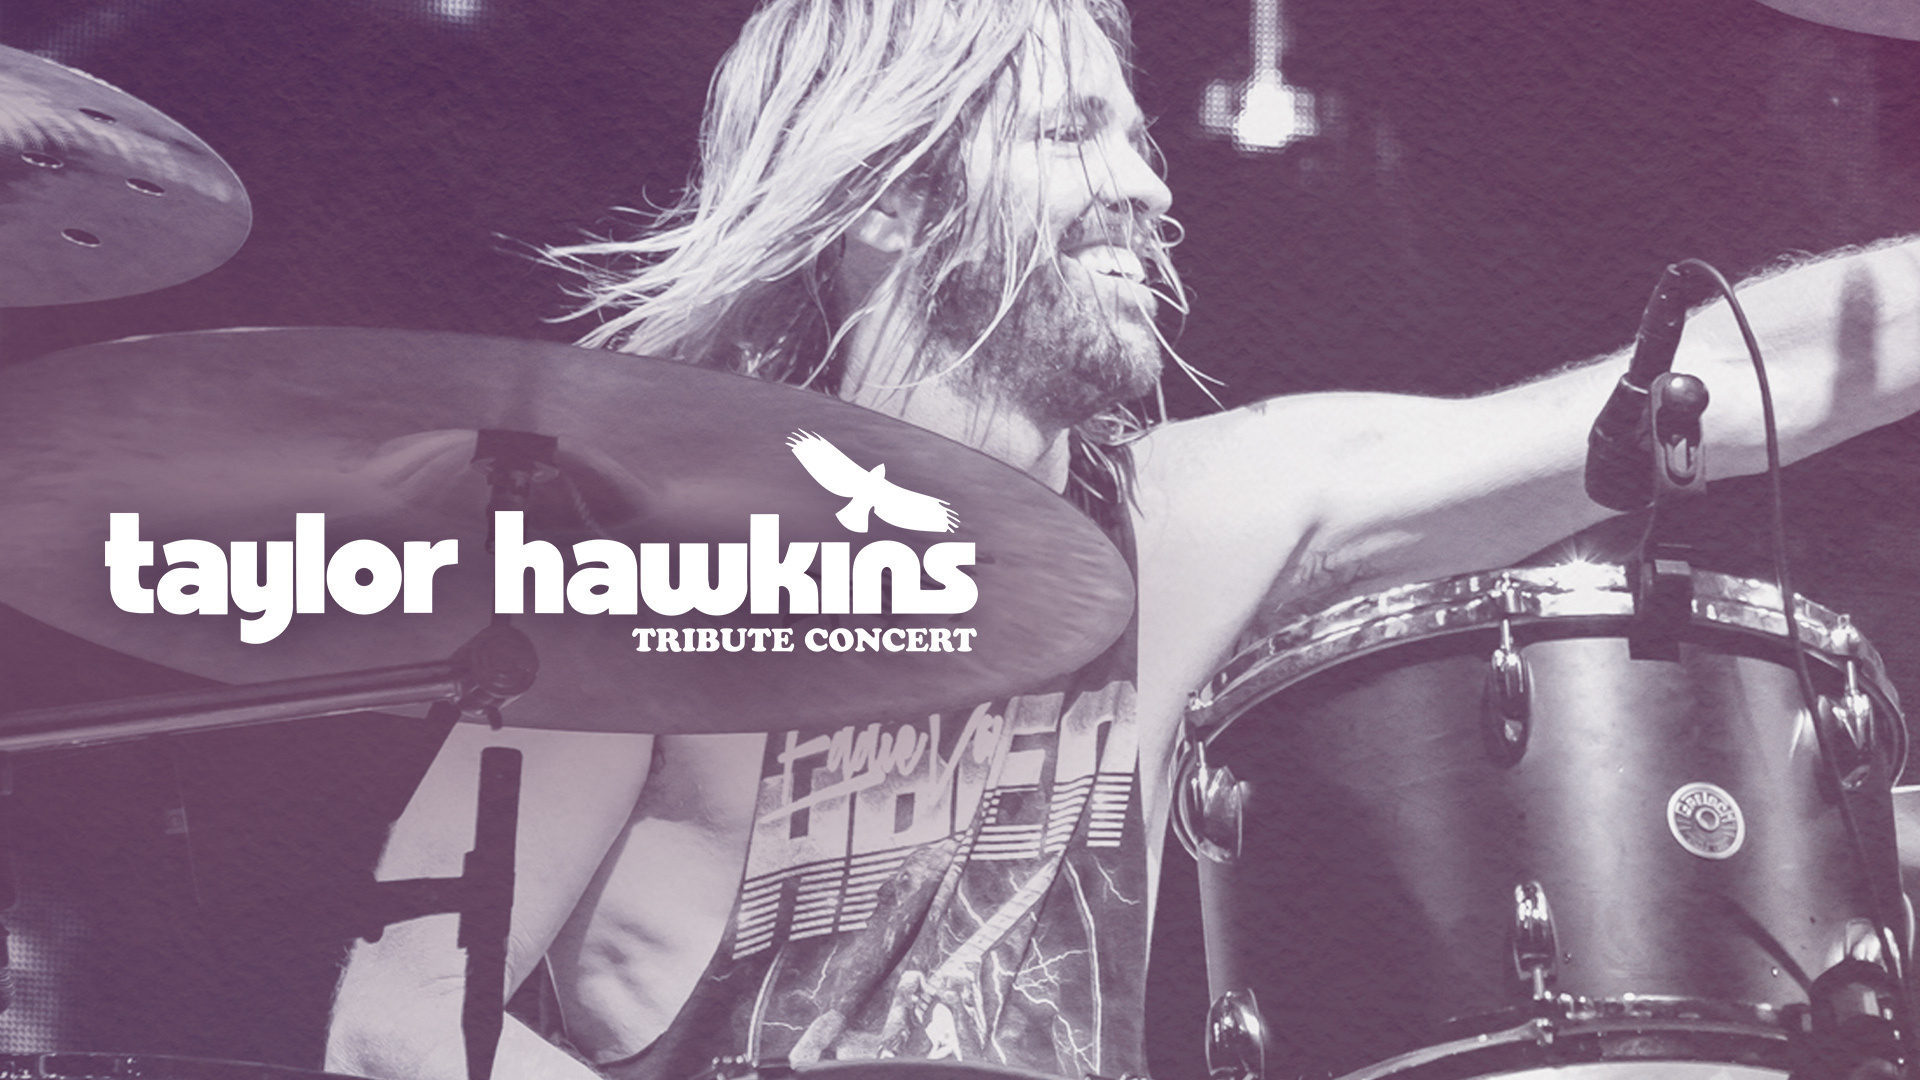 Taylor Hawkins Tribute Concert | Live Stream, Date, Location and Tickets info